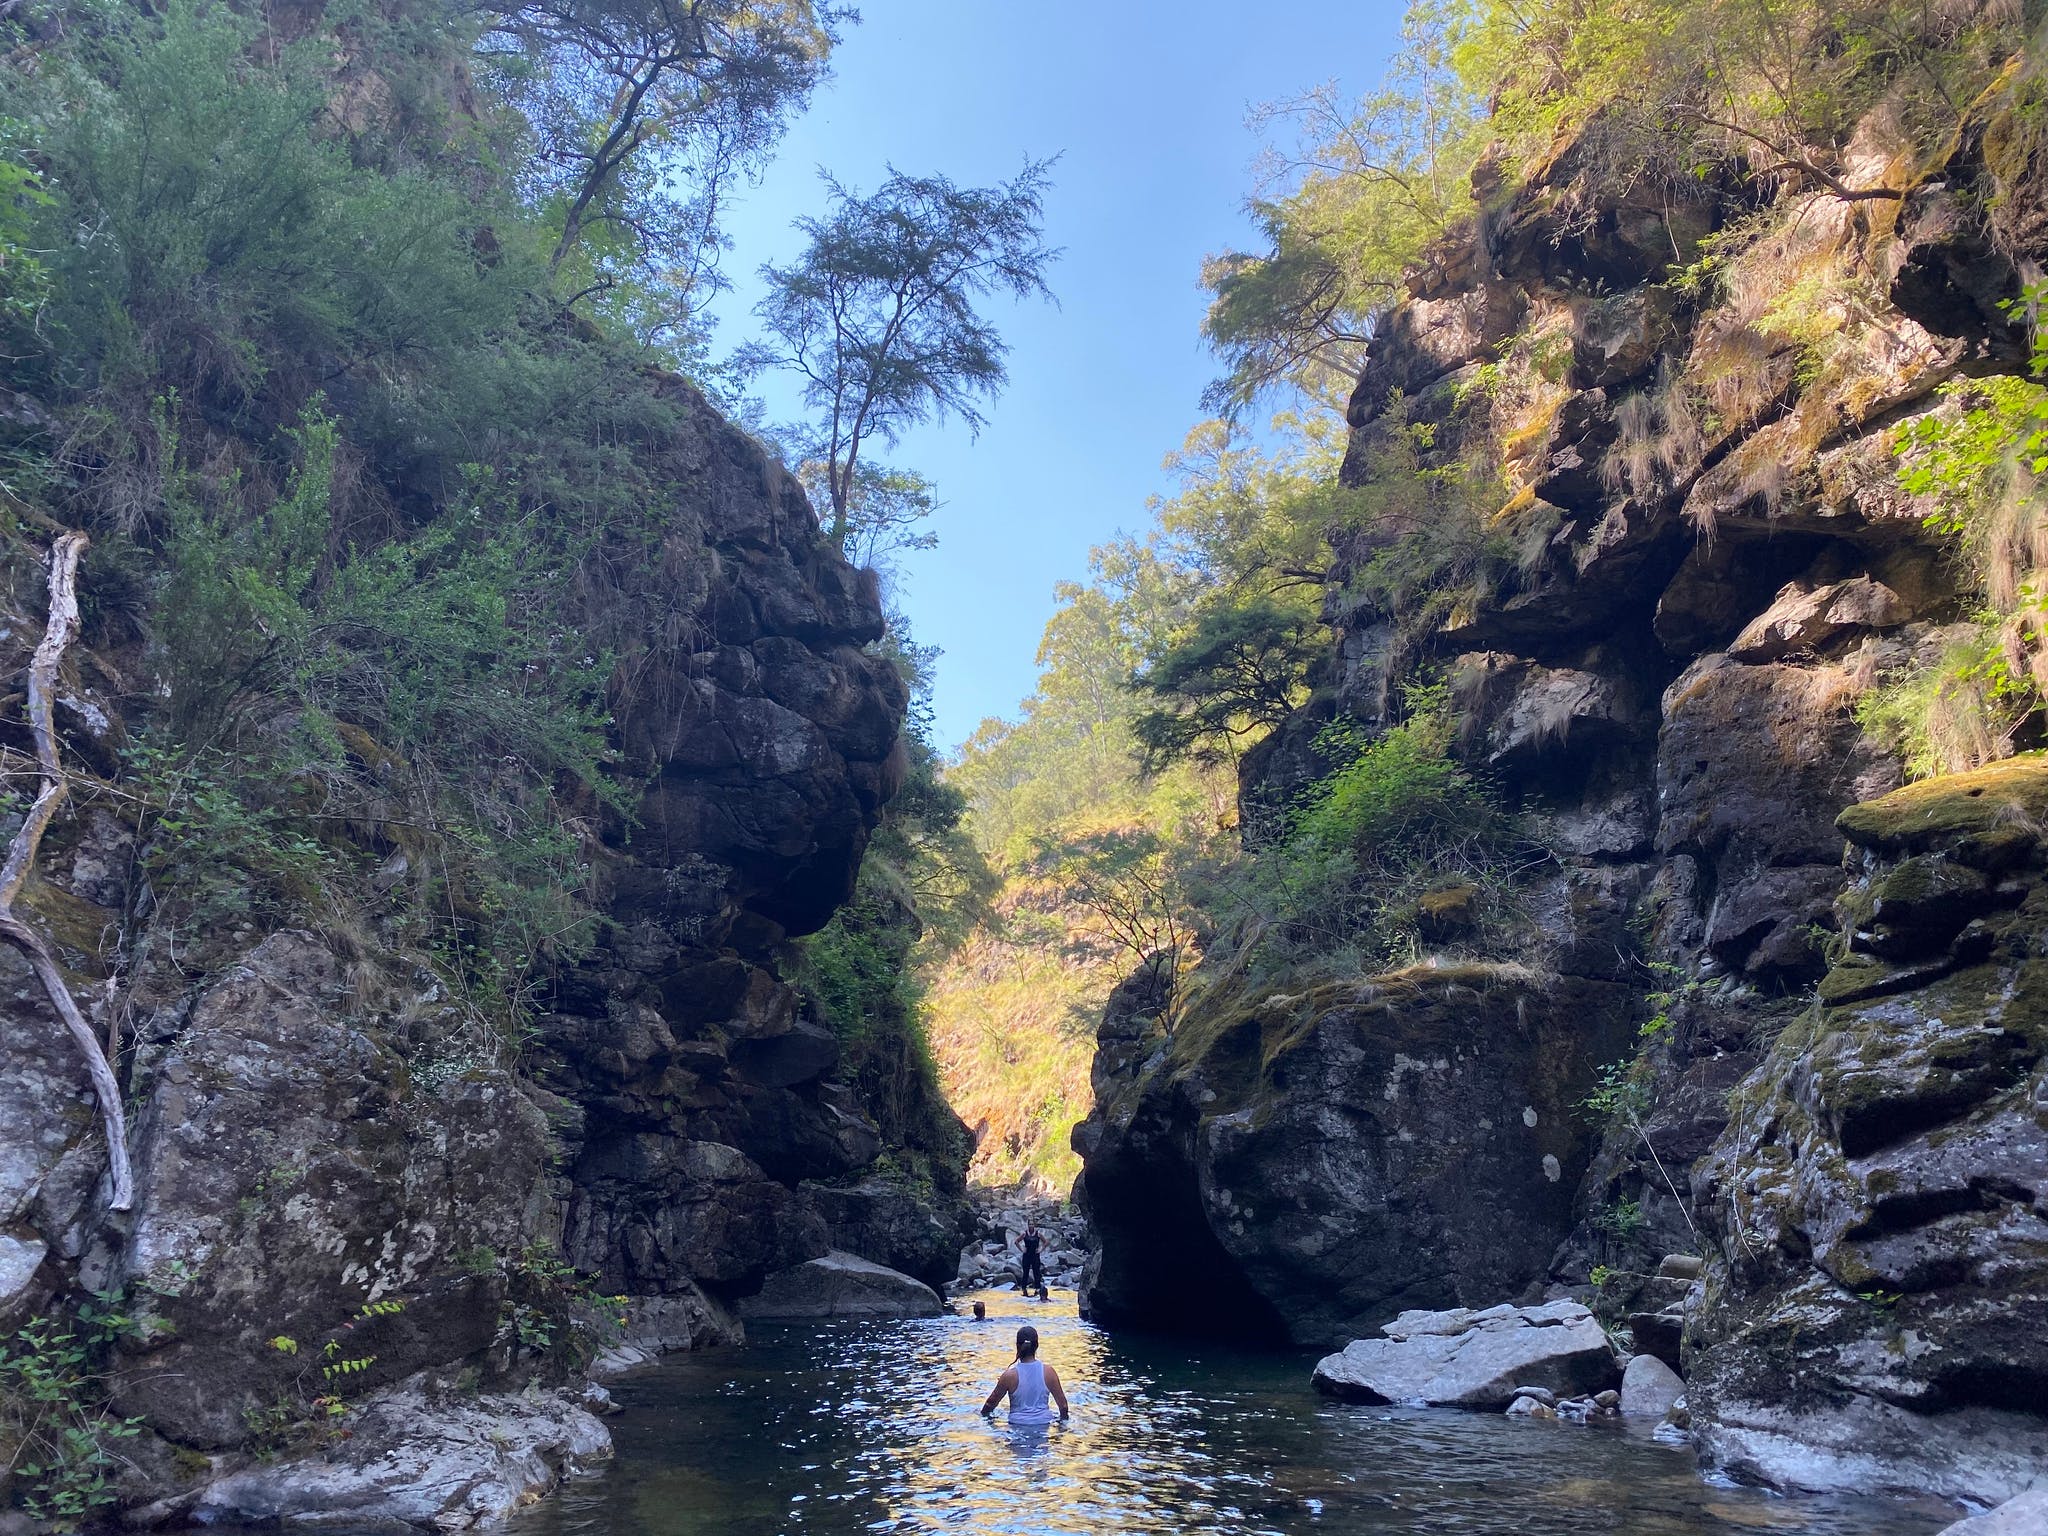 a person standing in a gorge